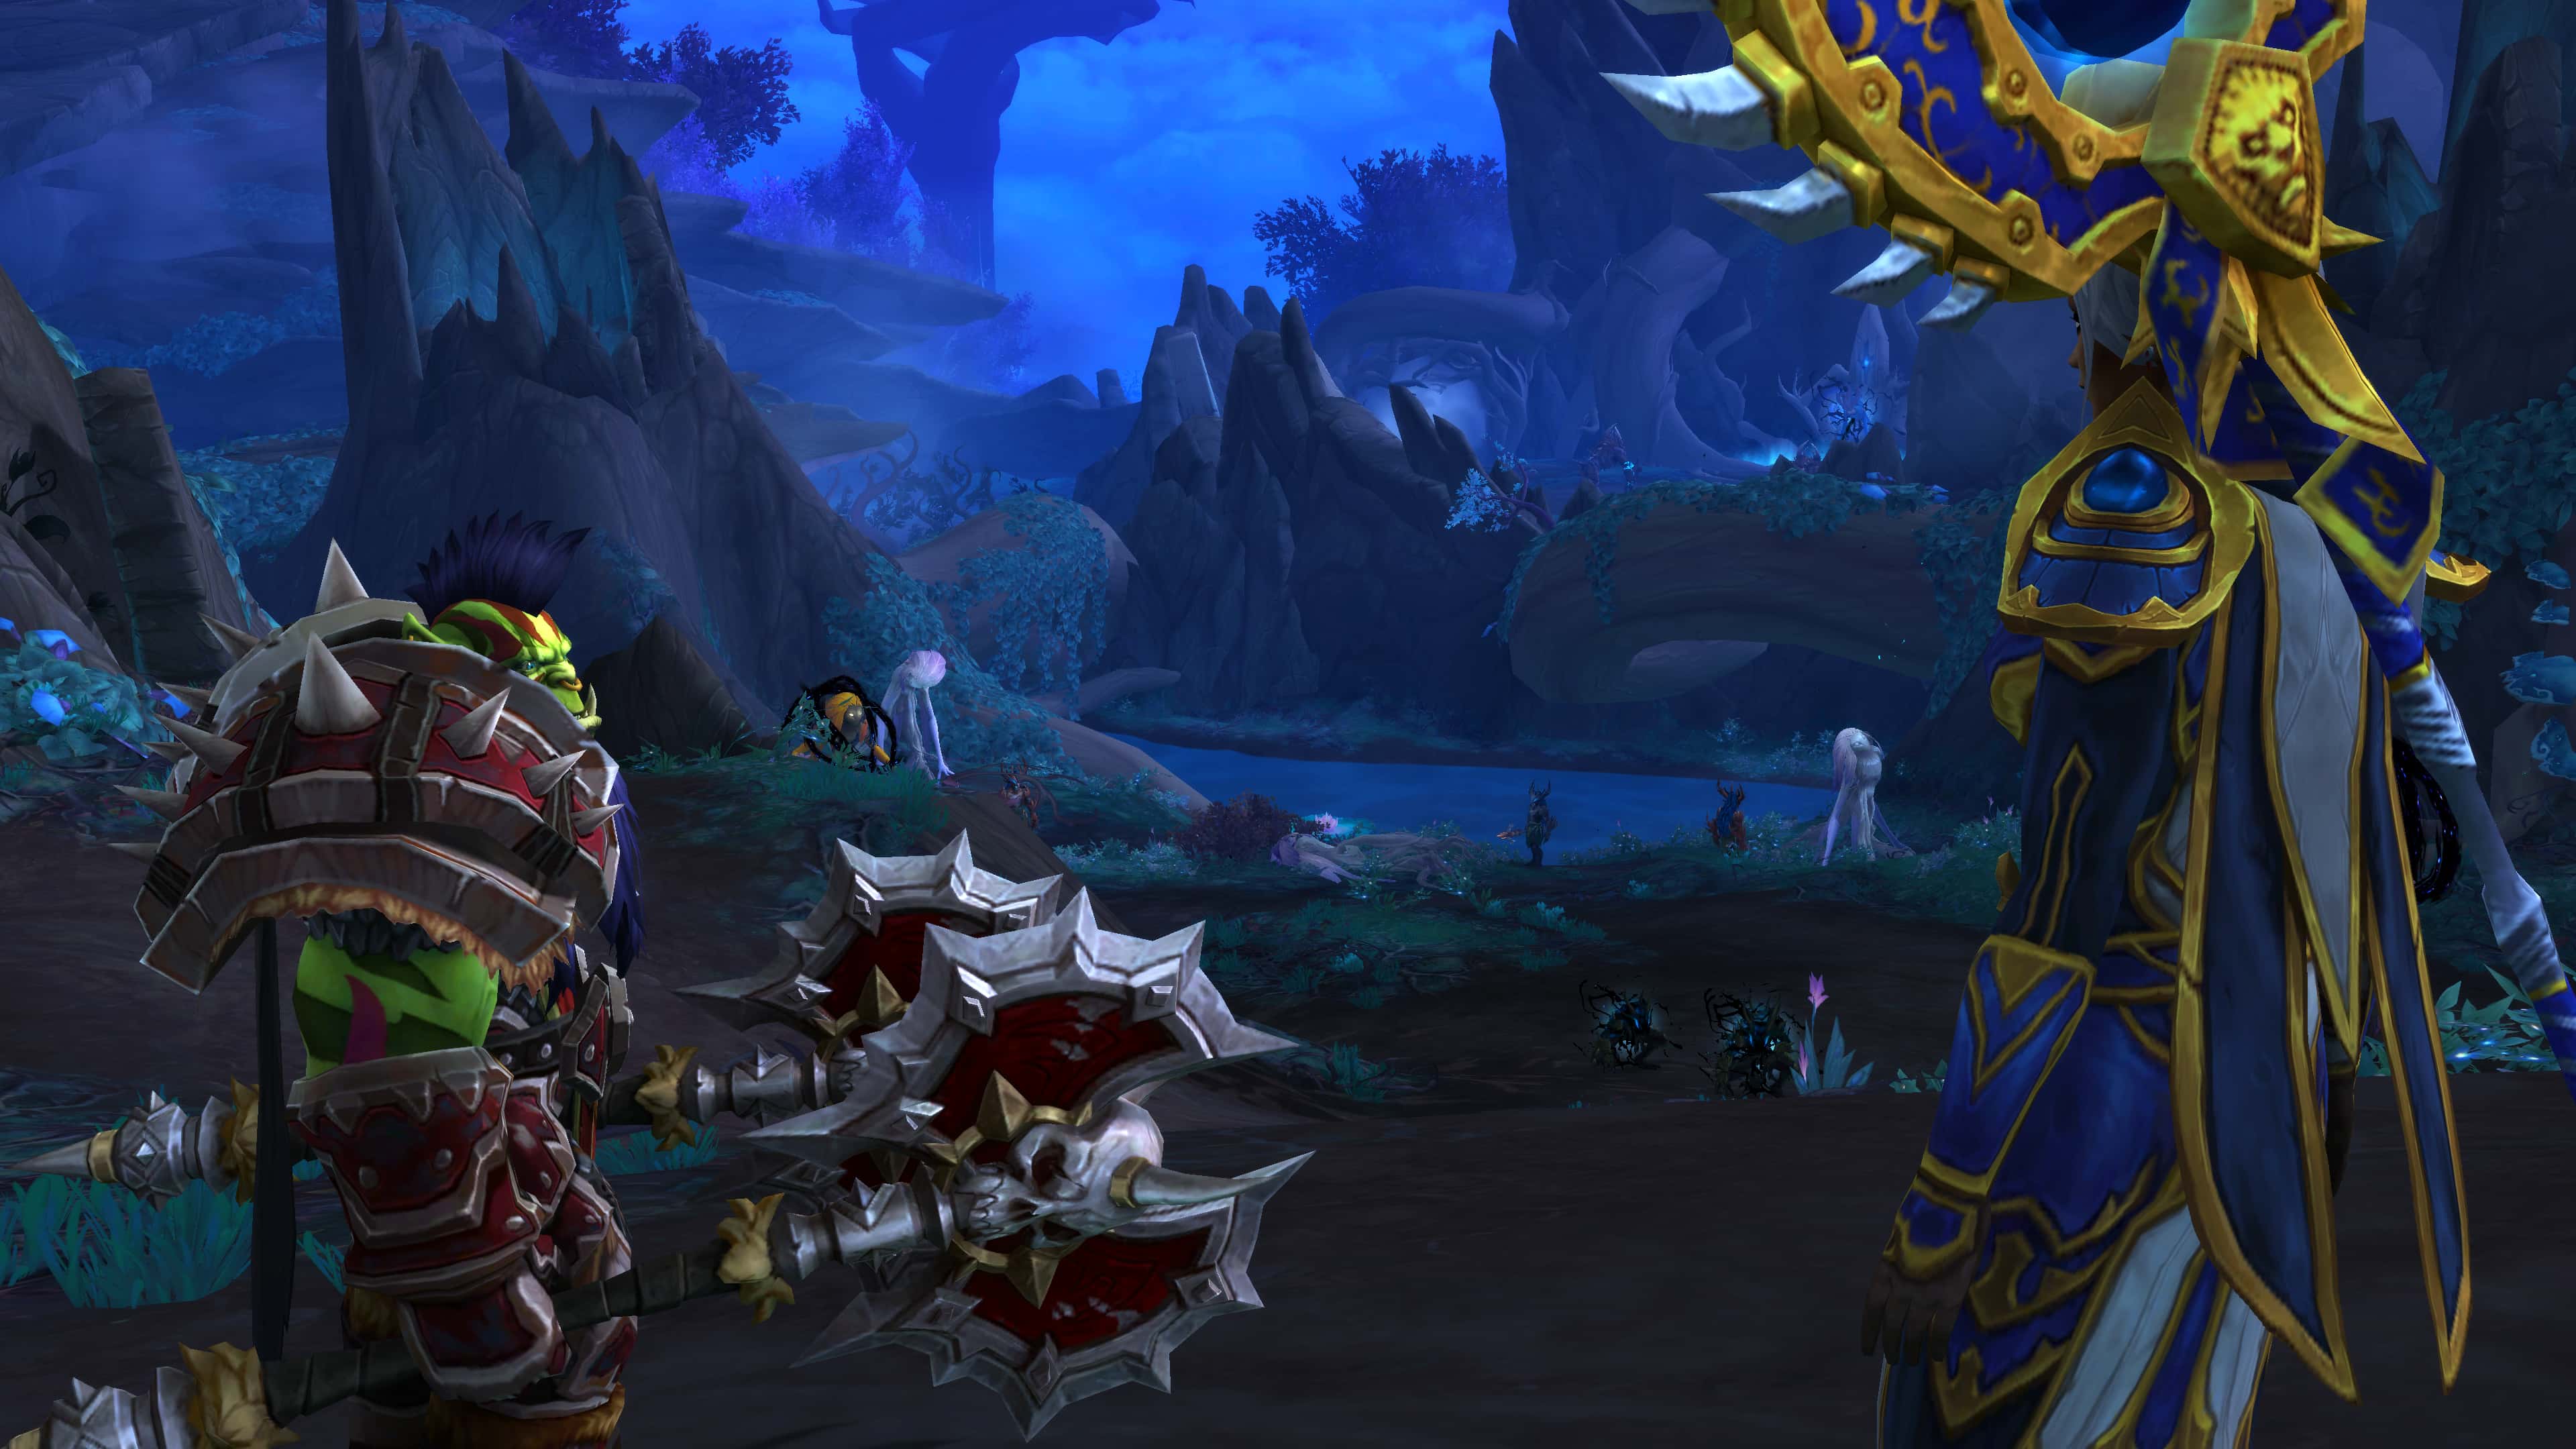 world of warcraft wow shadowlands 9.2.5 cross-faction raiding horde orc and alliance mage stand together